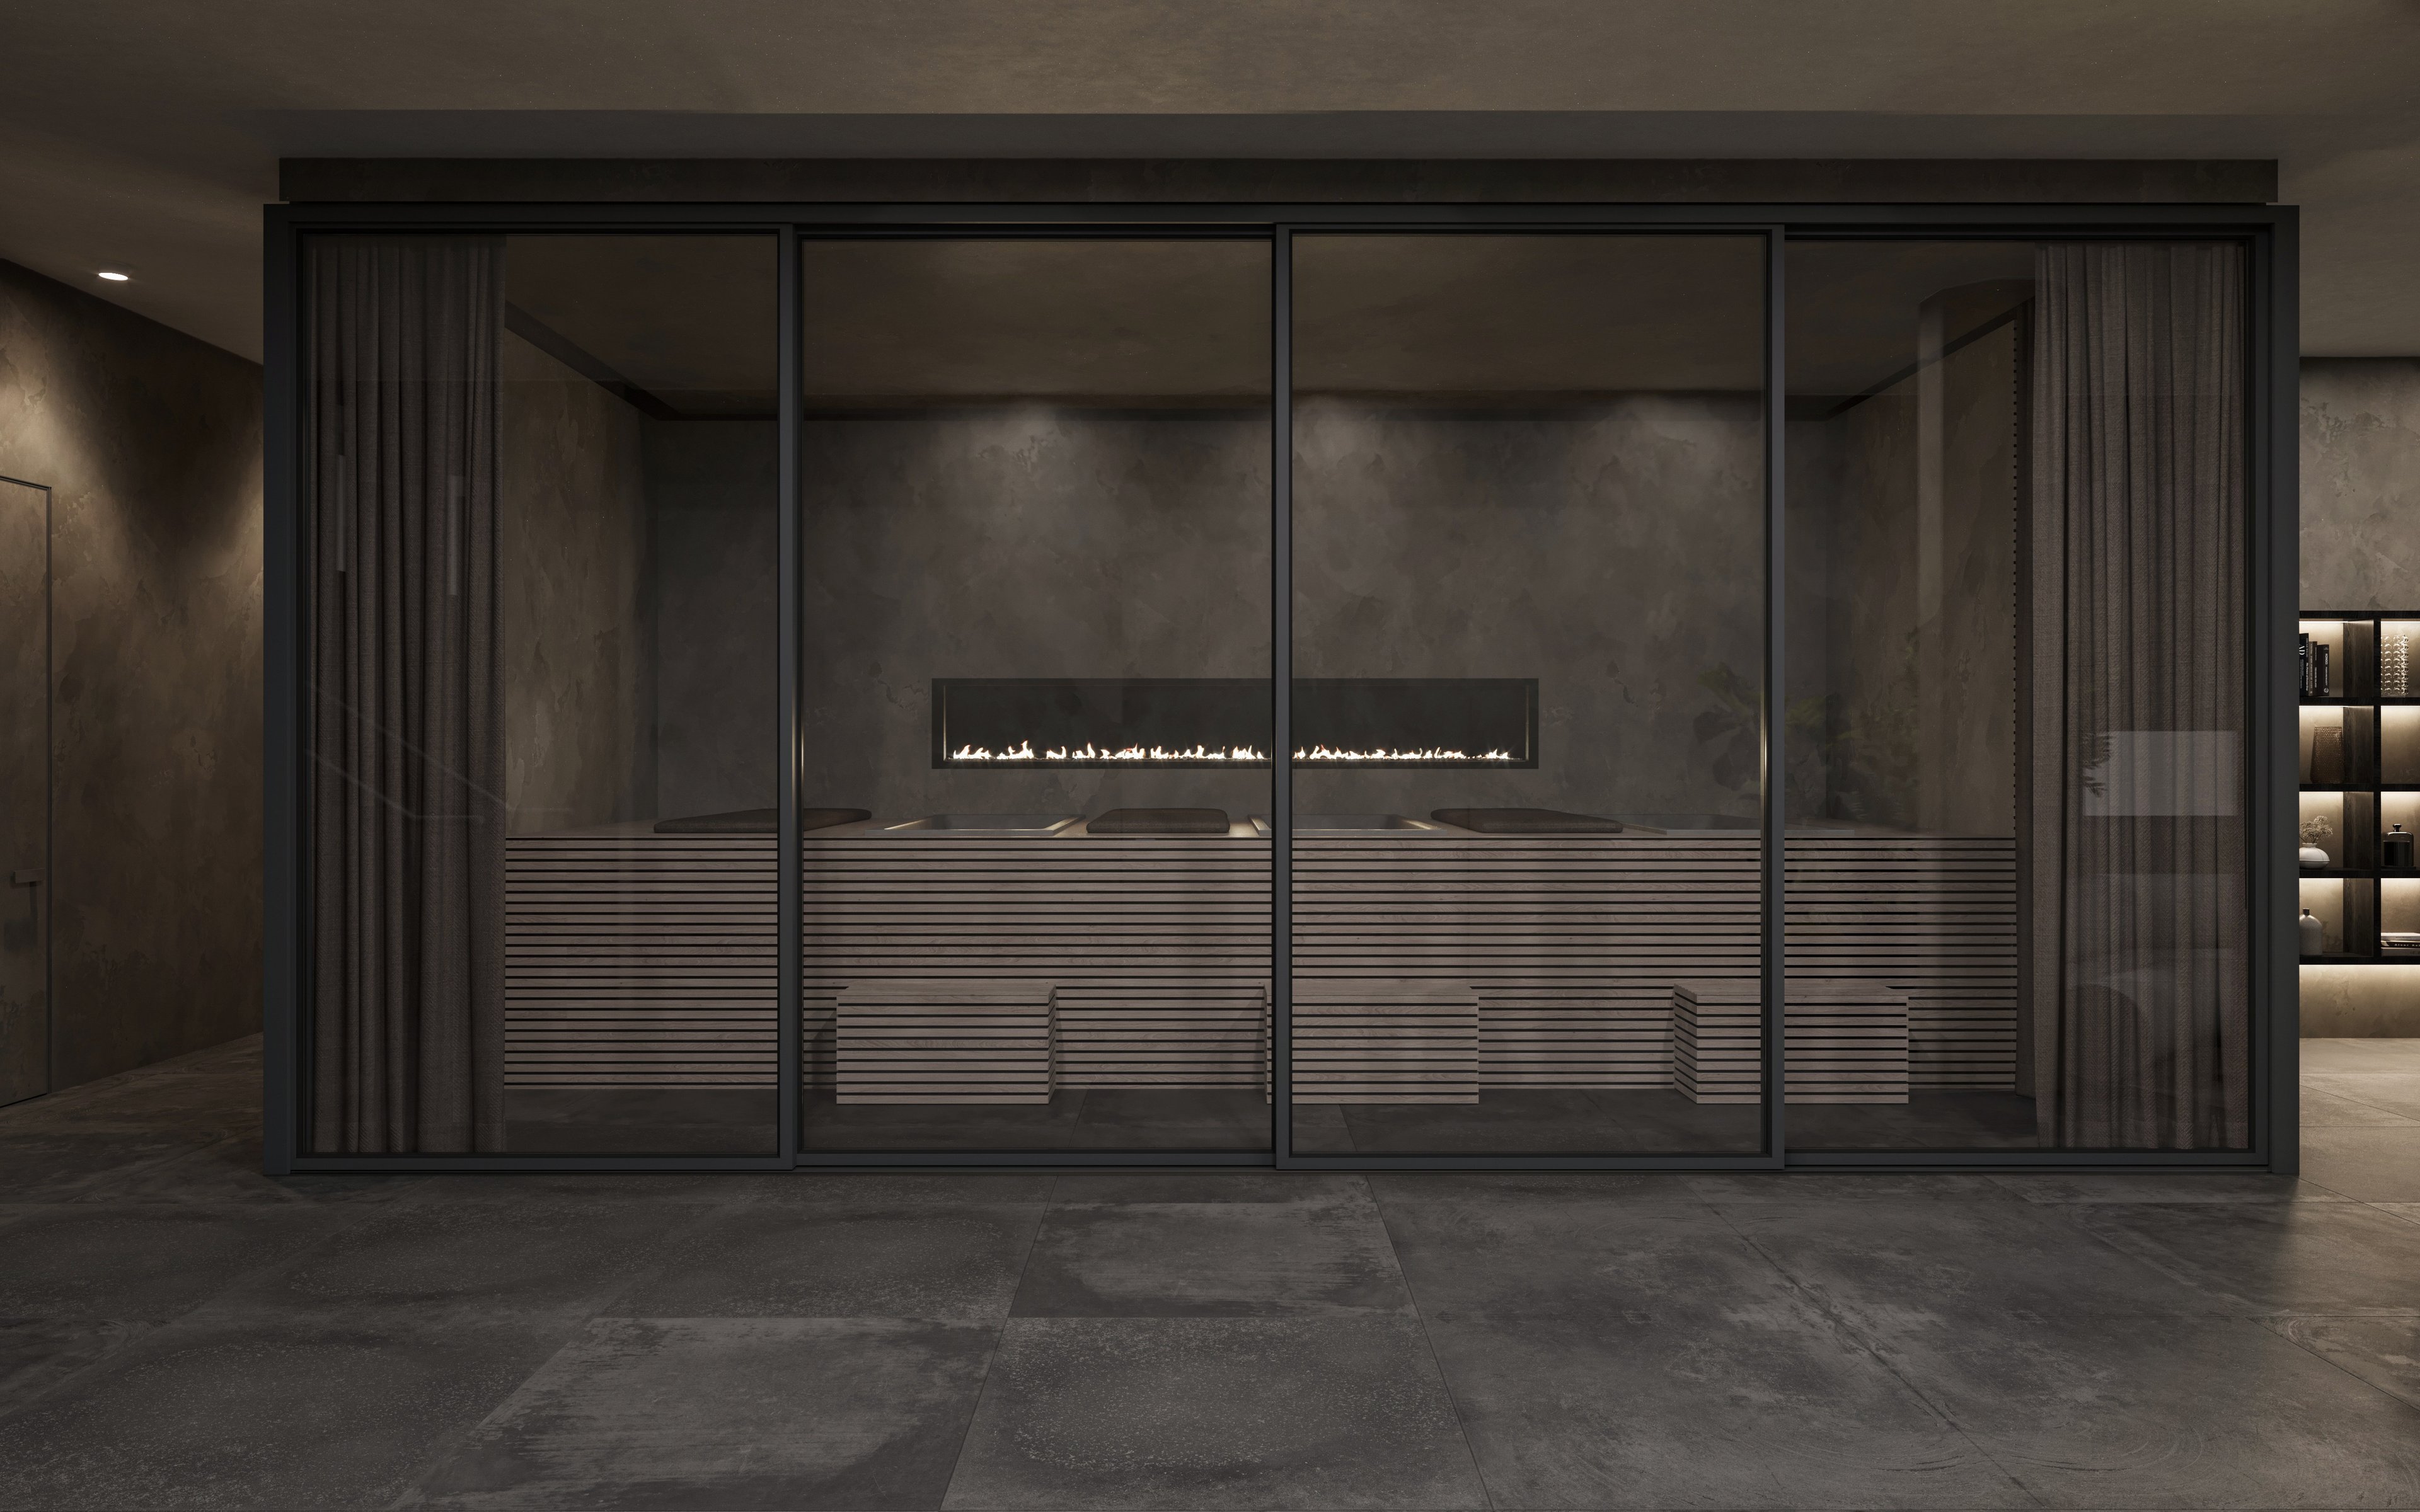 3D render of the Ice Bath Suite - 3 ice baths in front of an indoor fireplace